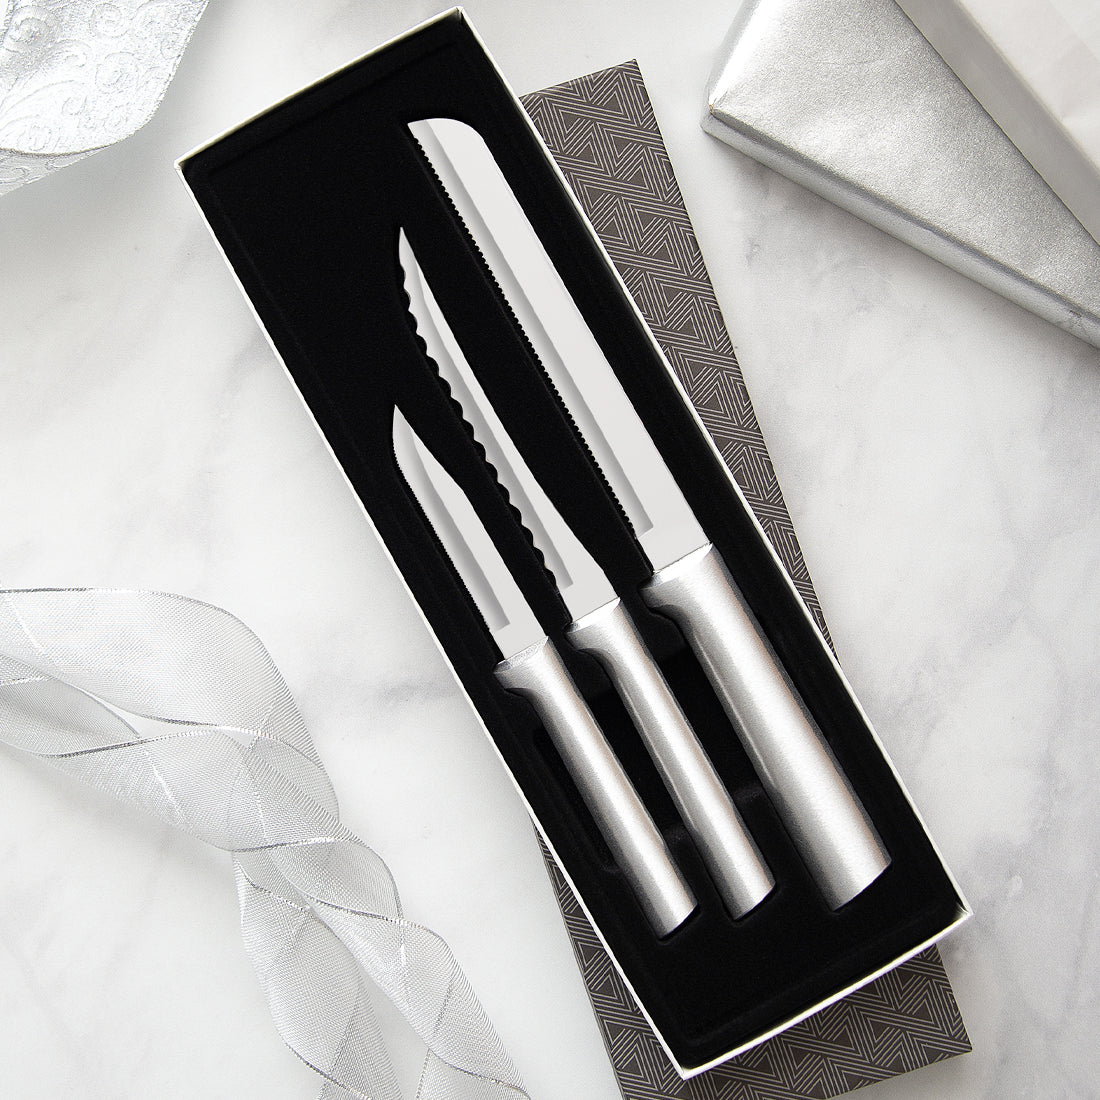 Rada Cutlery's Sensational Serrations Gift Set with silver handles in a black-lined gift box. 